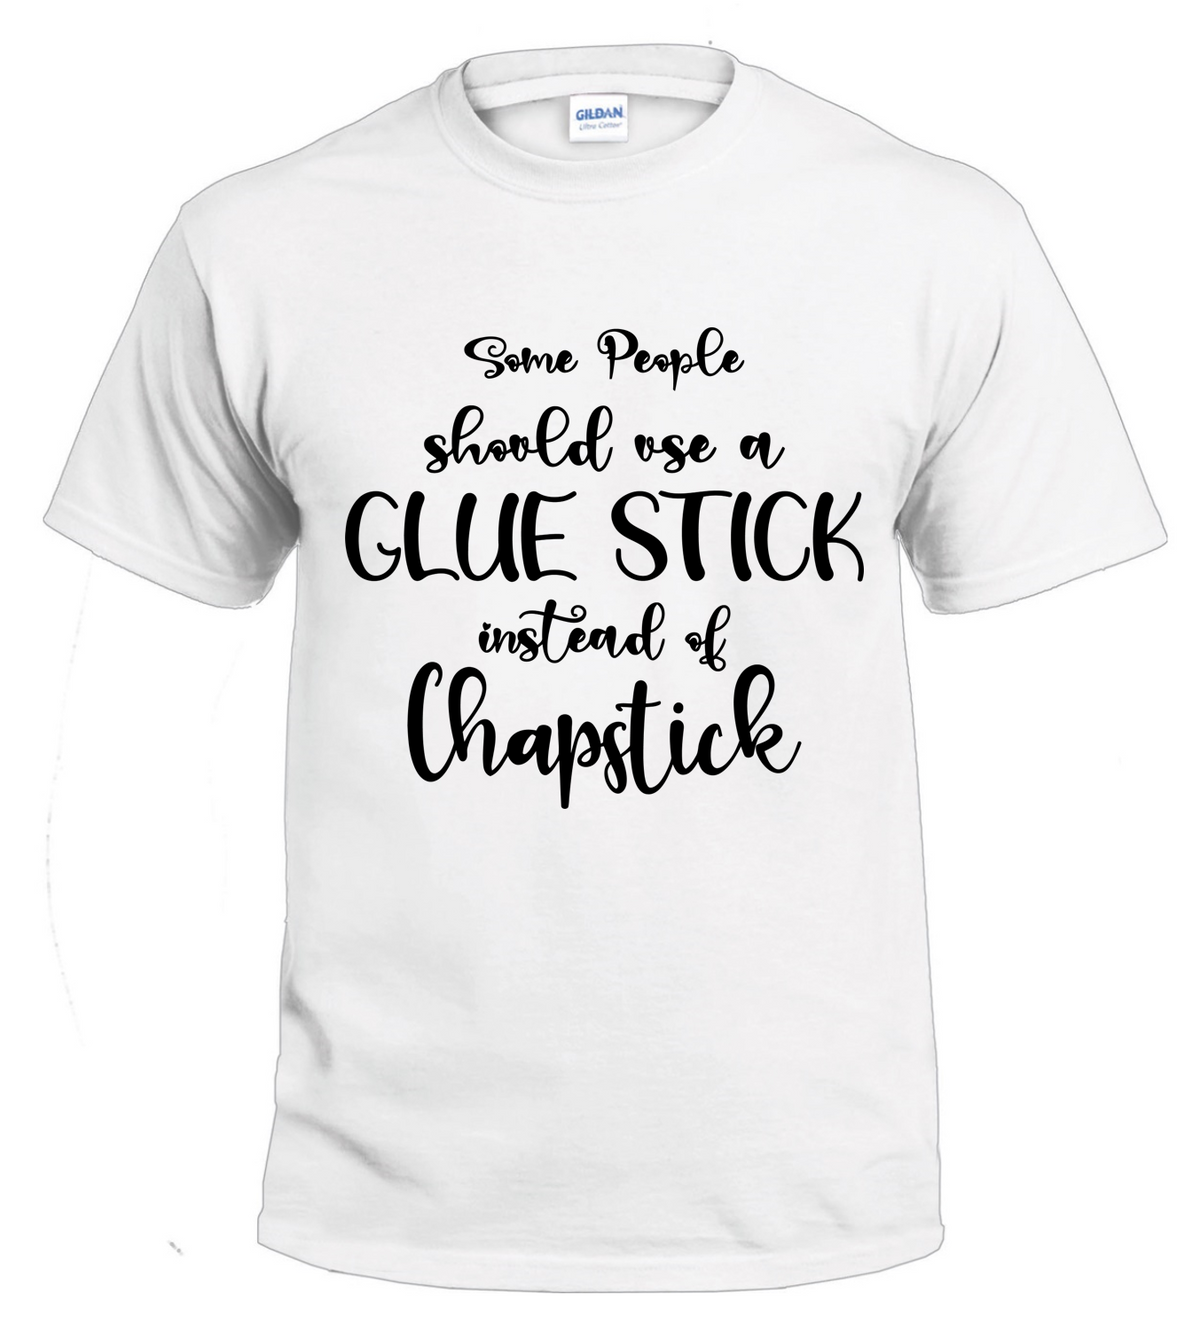 Some People Should Use a Glue Stick Sassy t-shirt